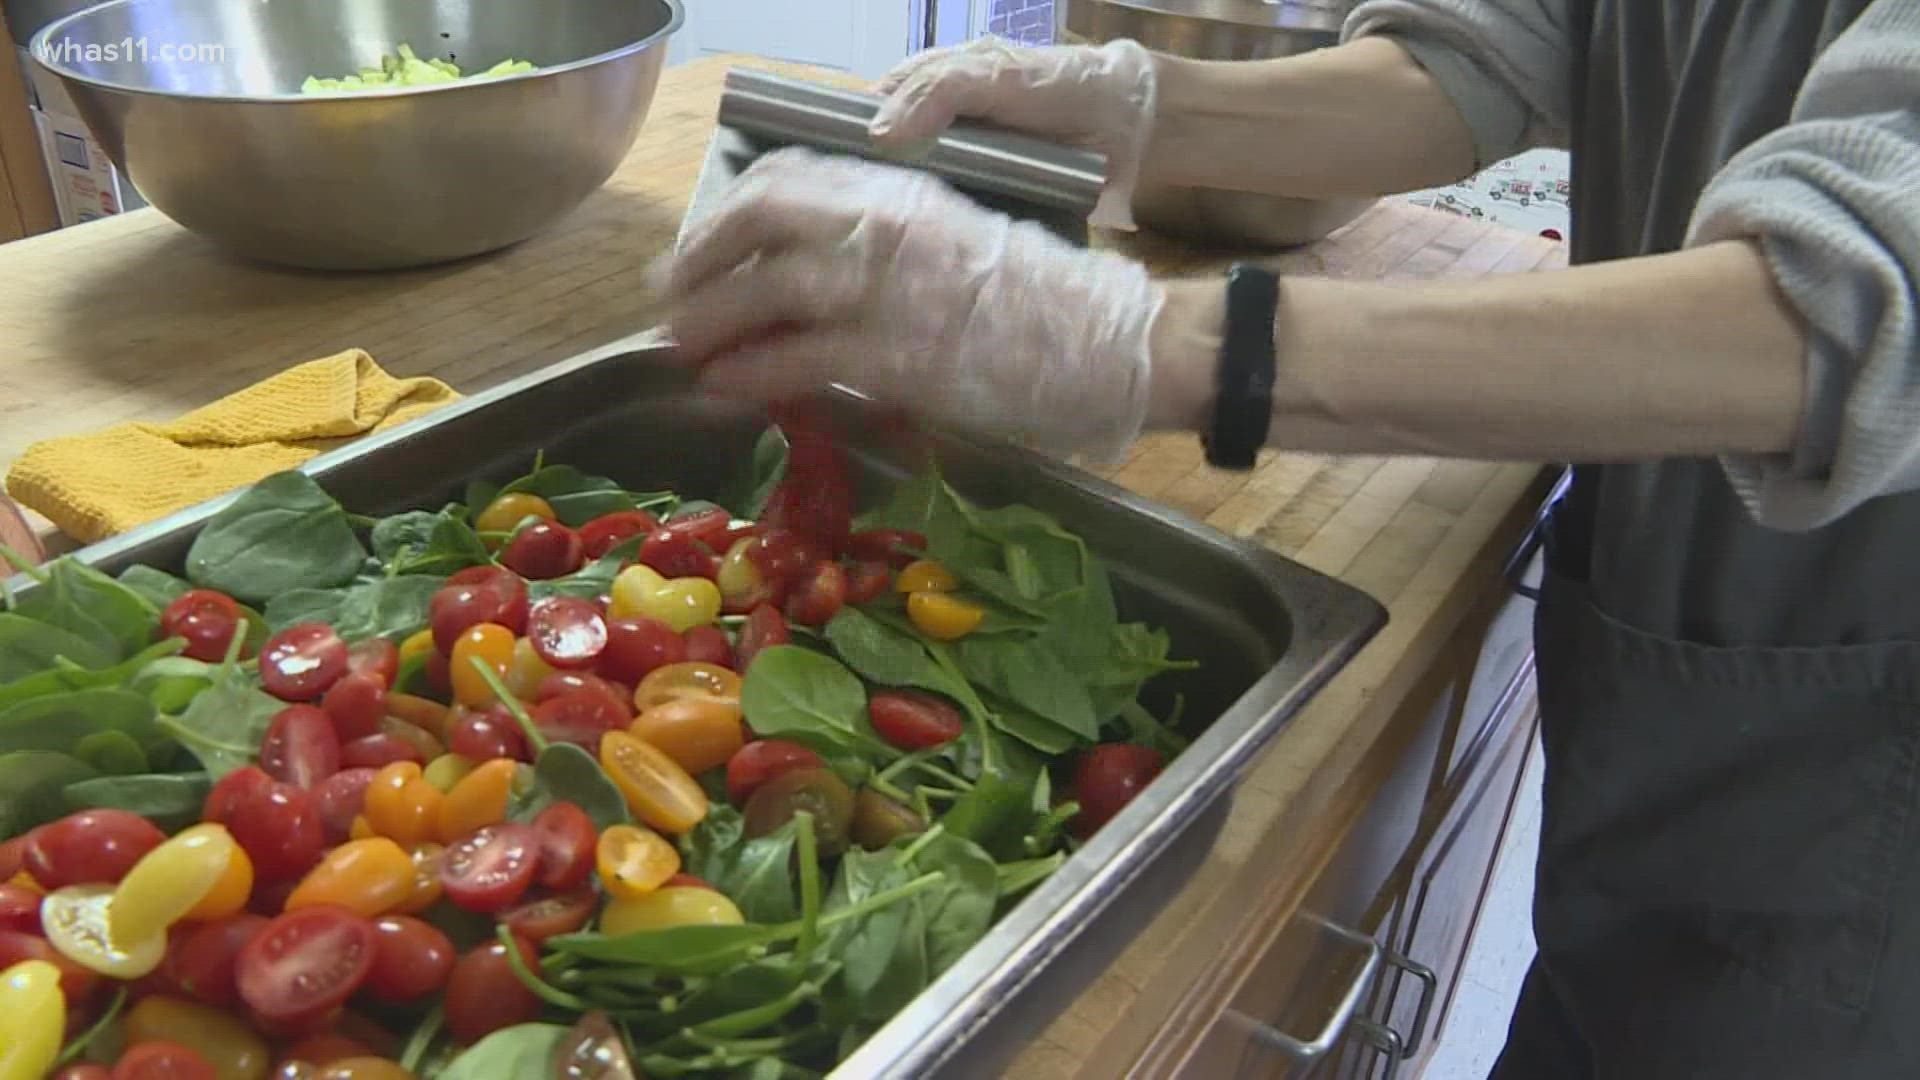 Feed Louisville is working to get meals out to those suffering from food insecurity. The nonprofit is also teaching students how to cook.